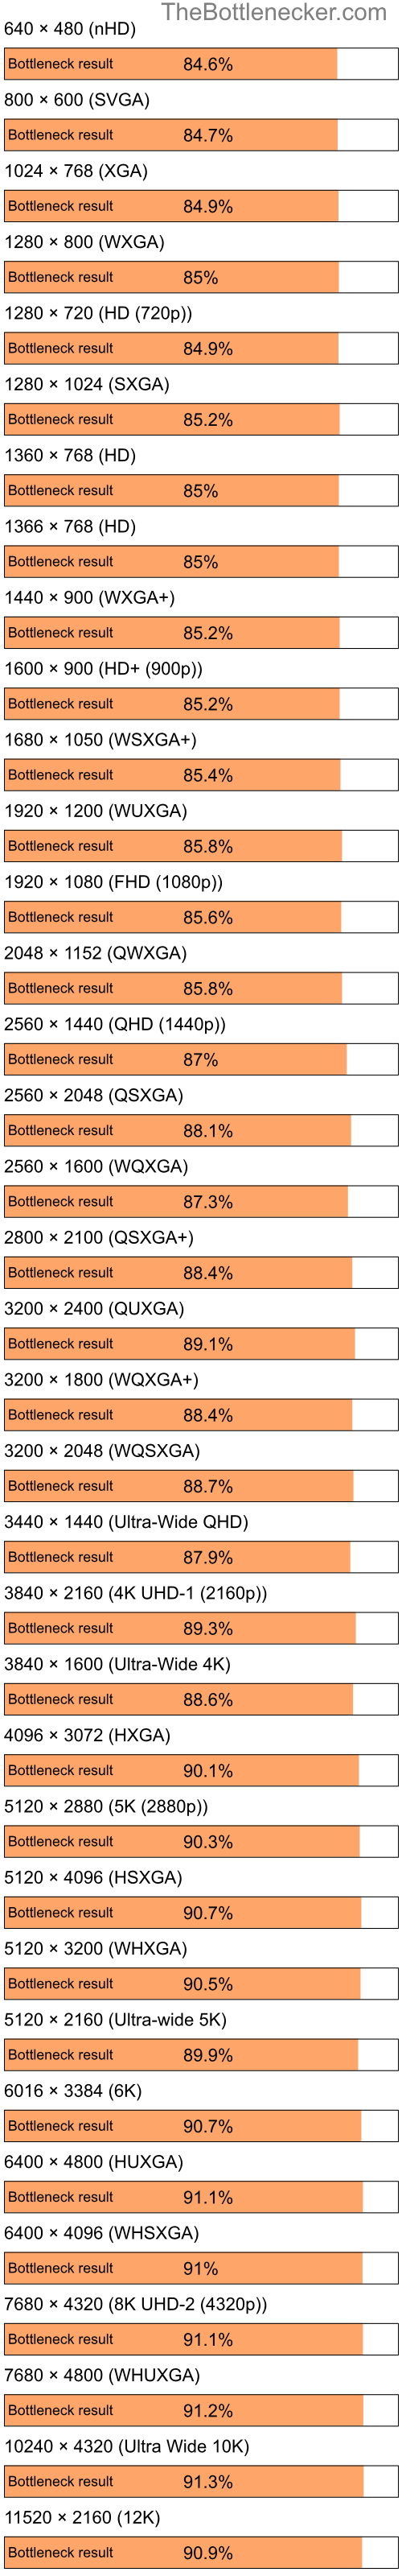 Bottleneck results by resolution for Intel Pentium 4 and NVIDIA GeForce FX 5200 in Processor Intense Tasks